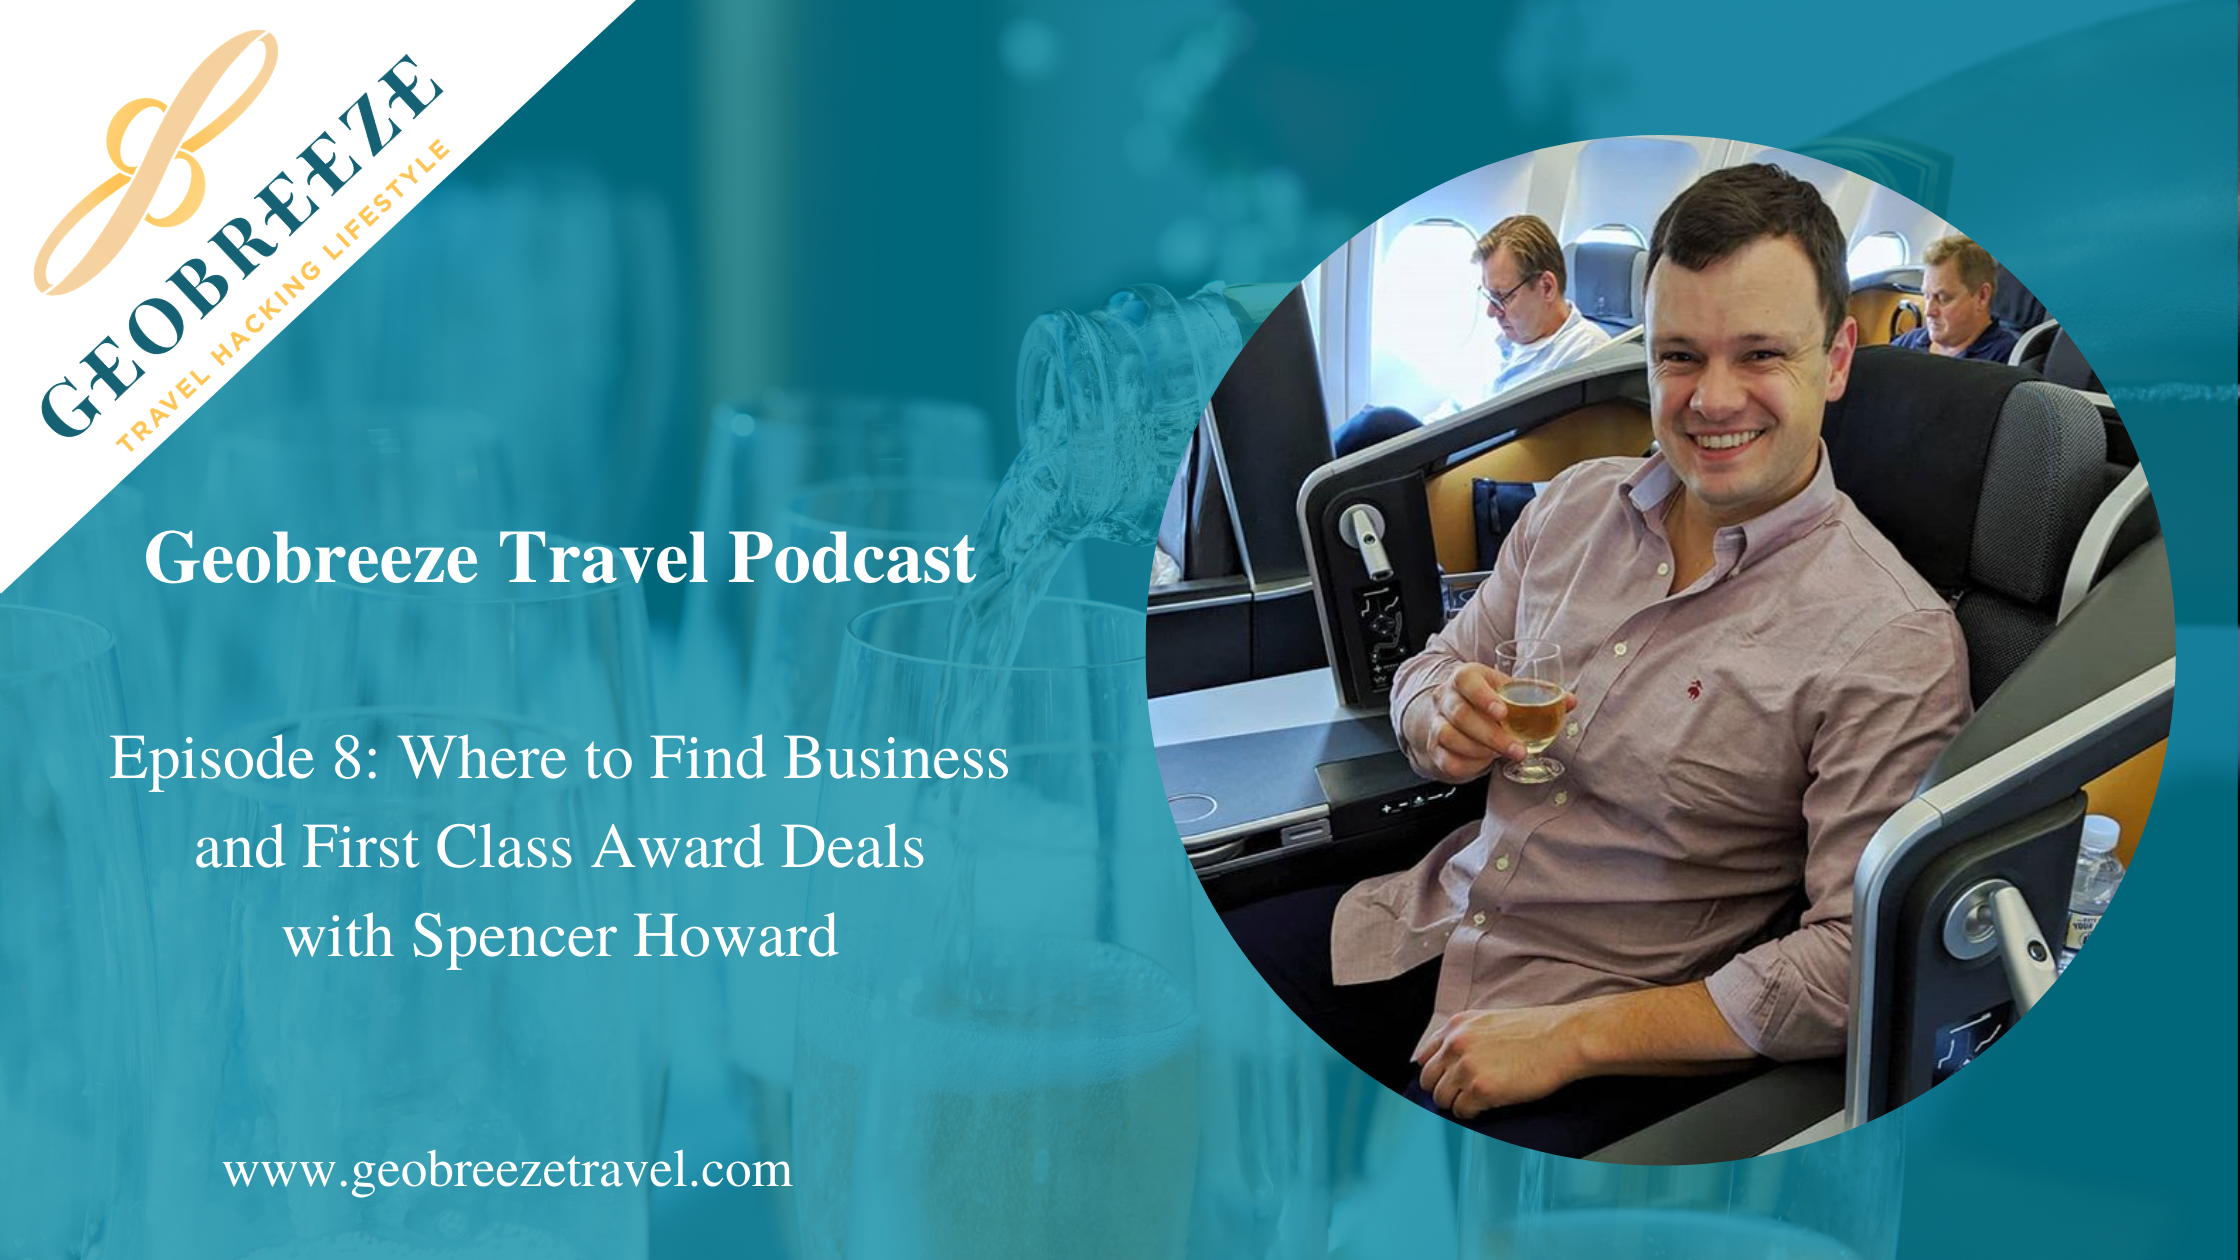 Episode 8: Where to Find Business and First Class Award Deals with Spencer Howard